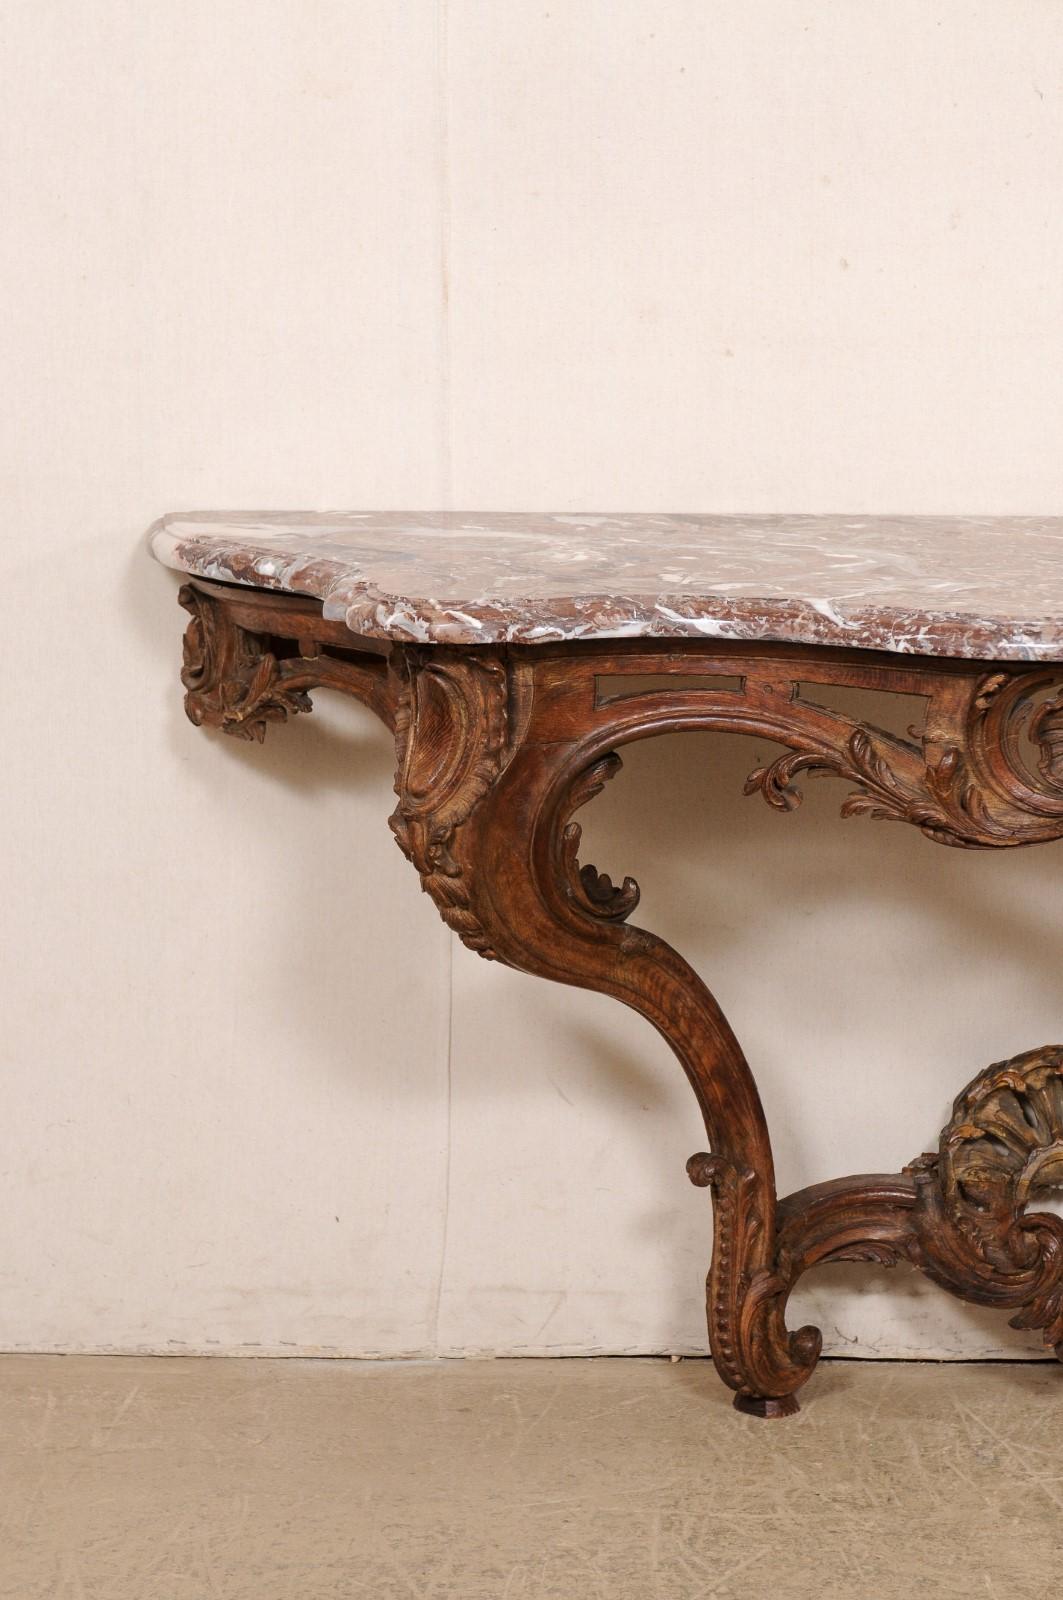 An Exquisite 18th C. French Rococo Serpentine Wall Console w/Marble Top In Good Condition For Sale In Atlanta, GA